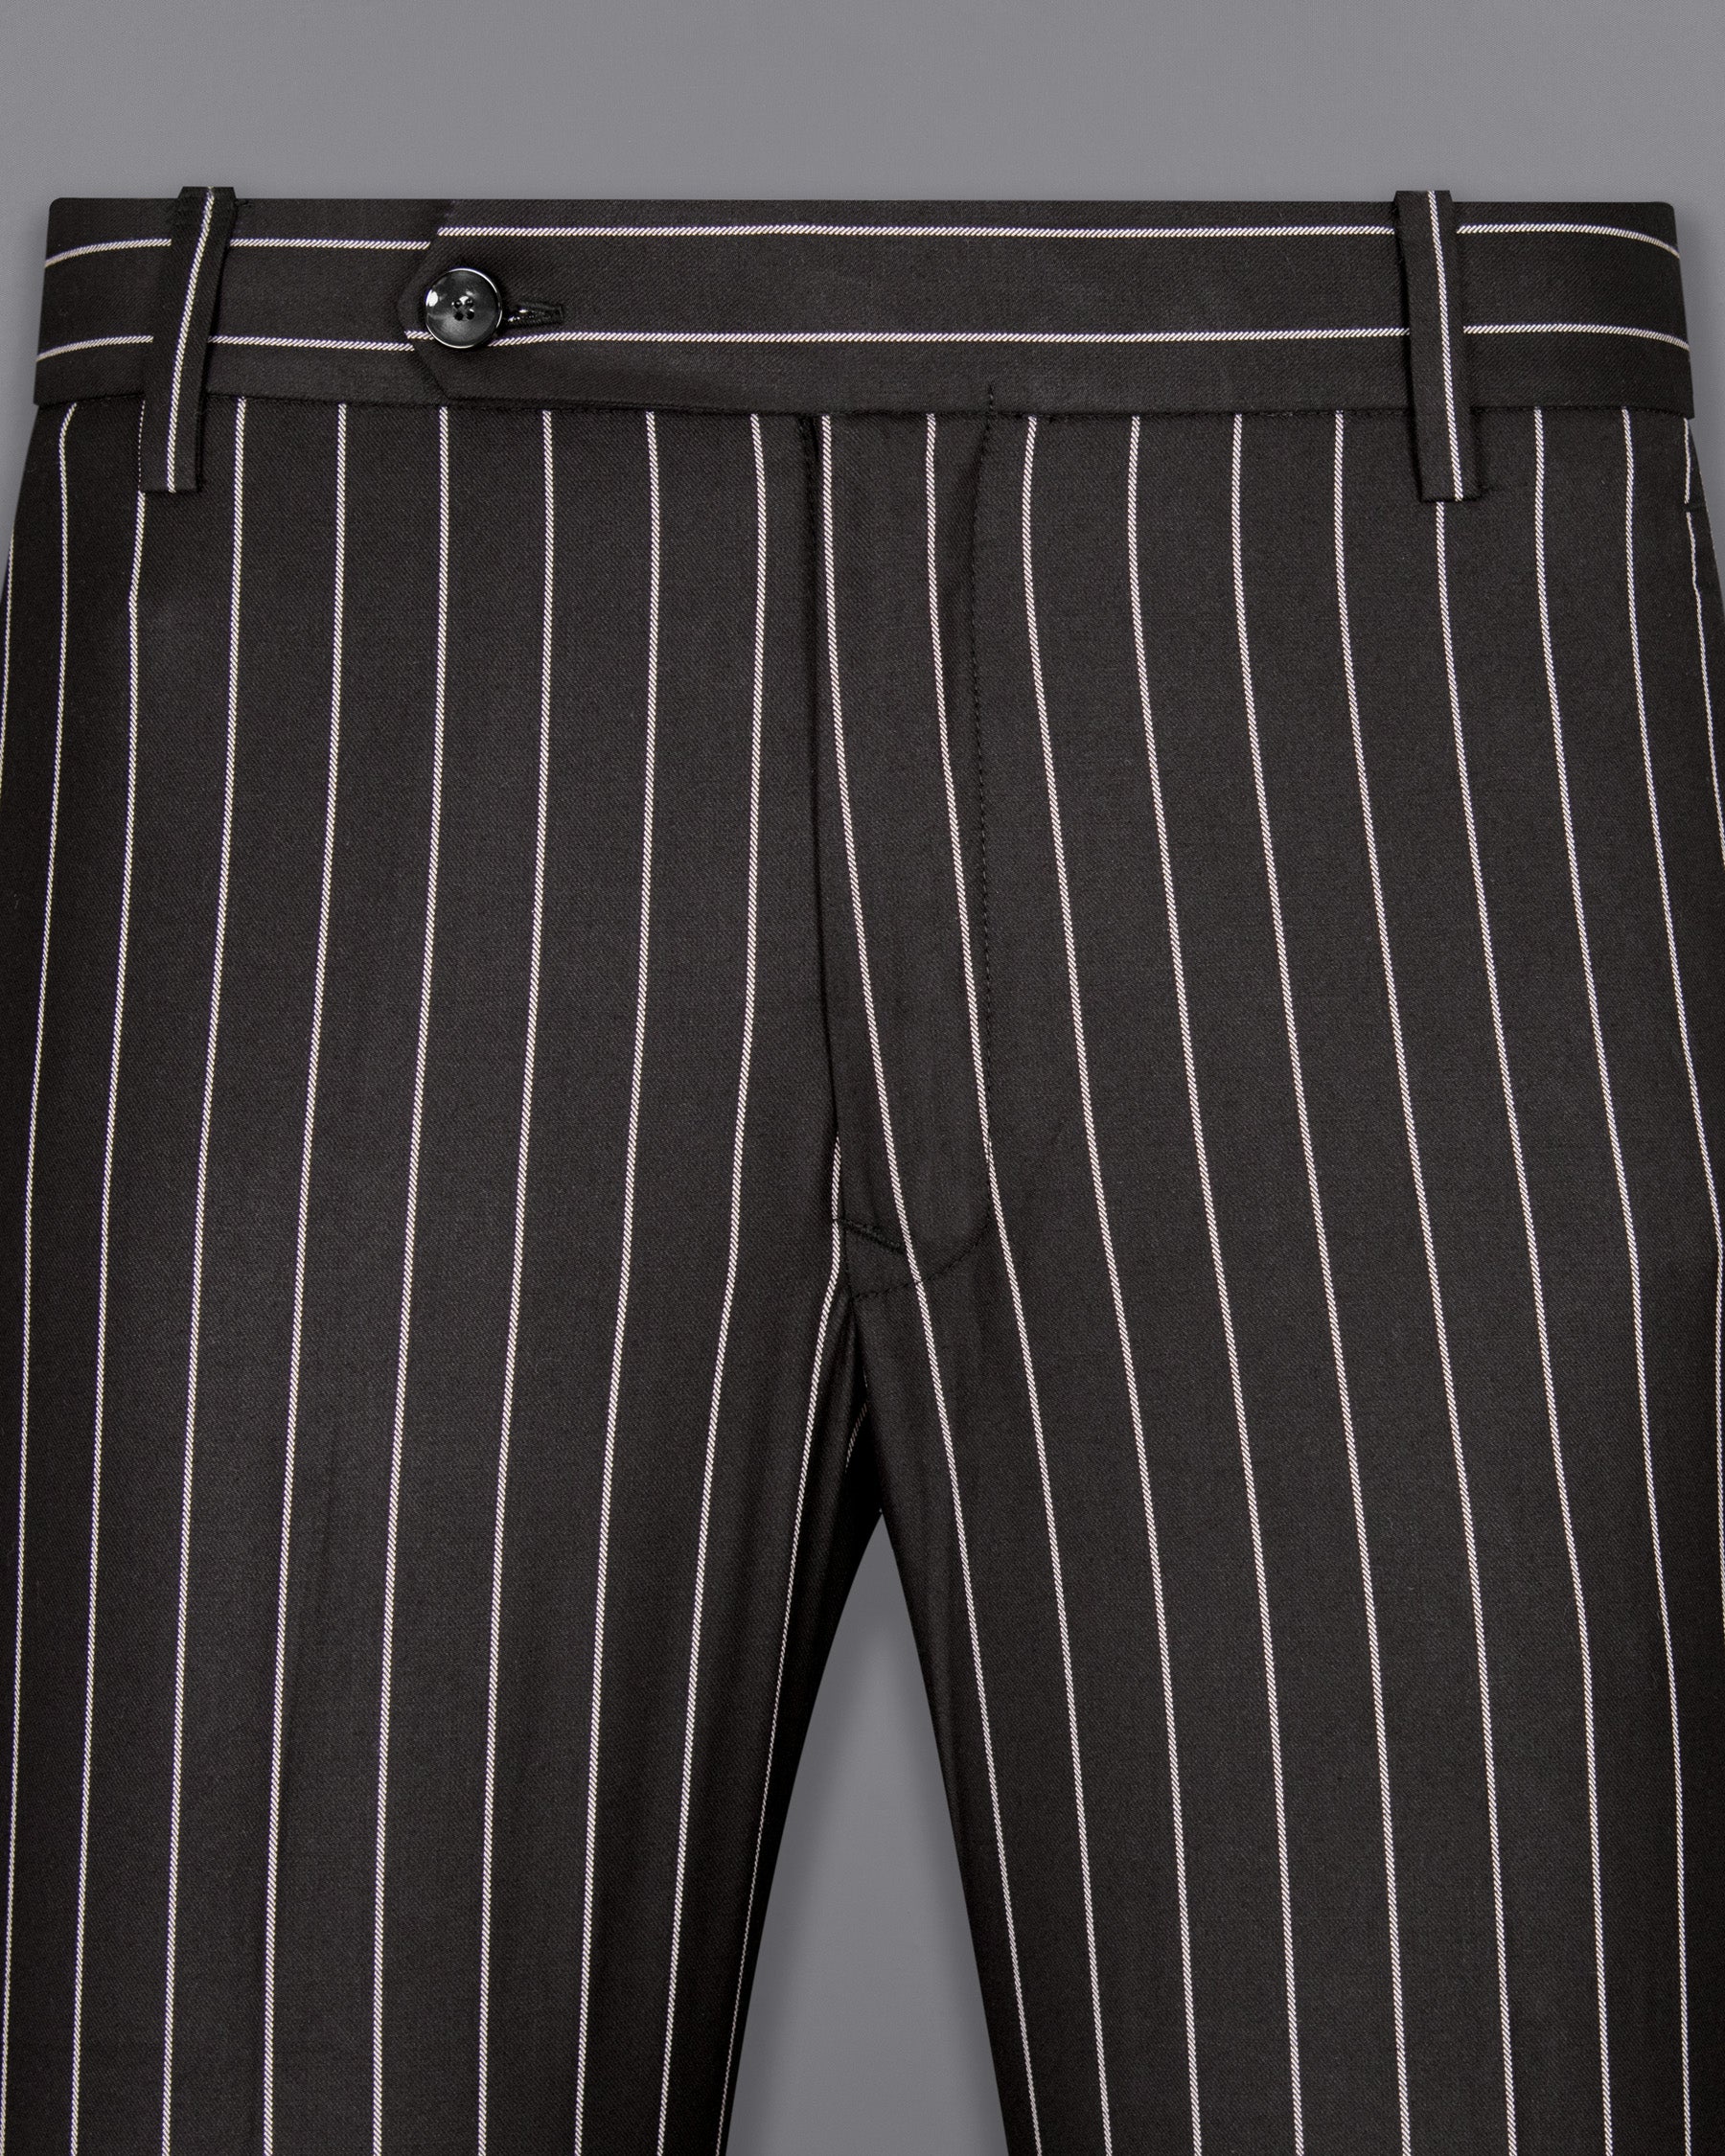 Charcoal Gray with white Striped Woolrich Pant T1293-28, T1293-30, T1293-32, T1293-34, T1293-36, T1293-38, T1293-40, T1293-42, T1293-44